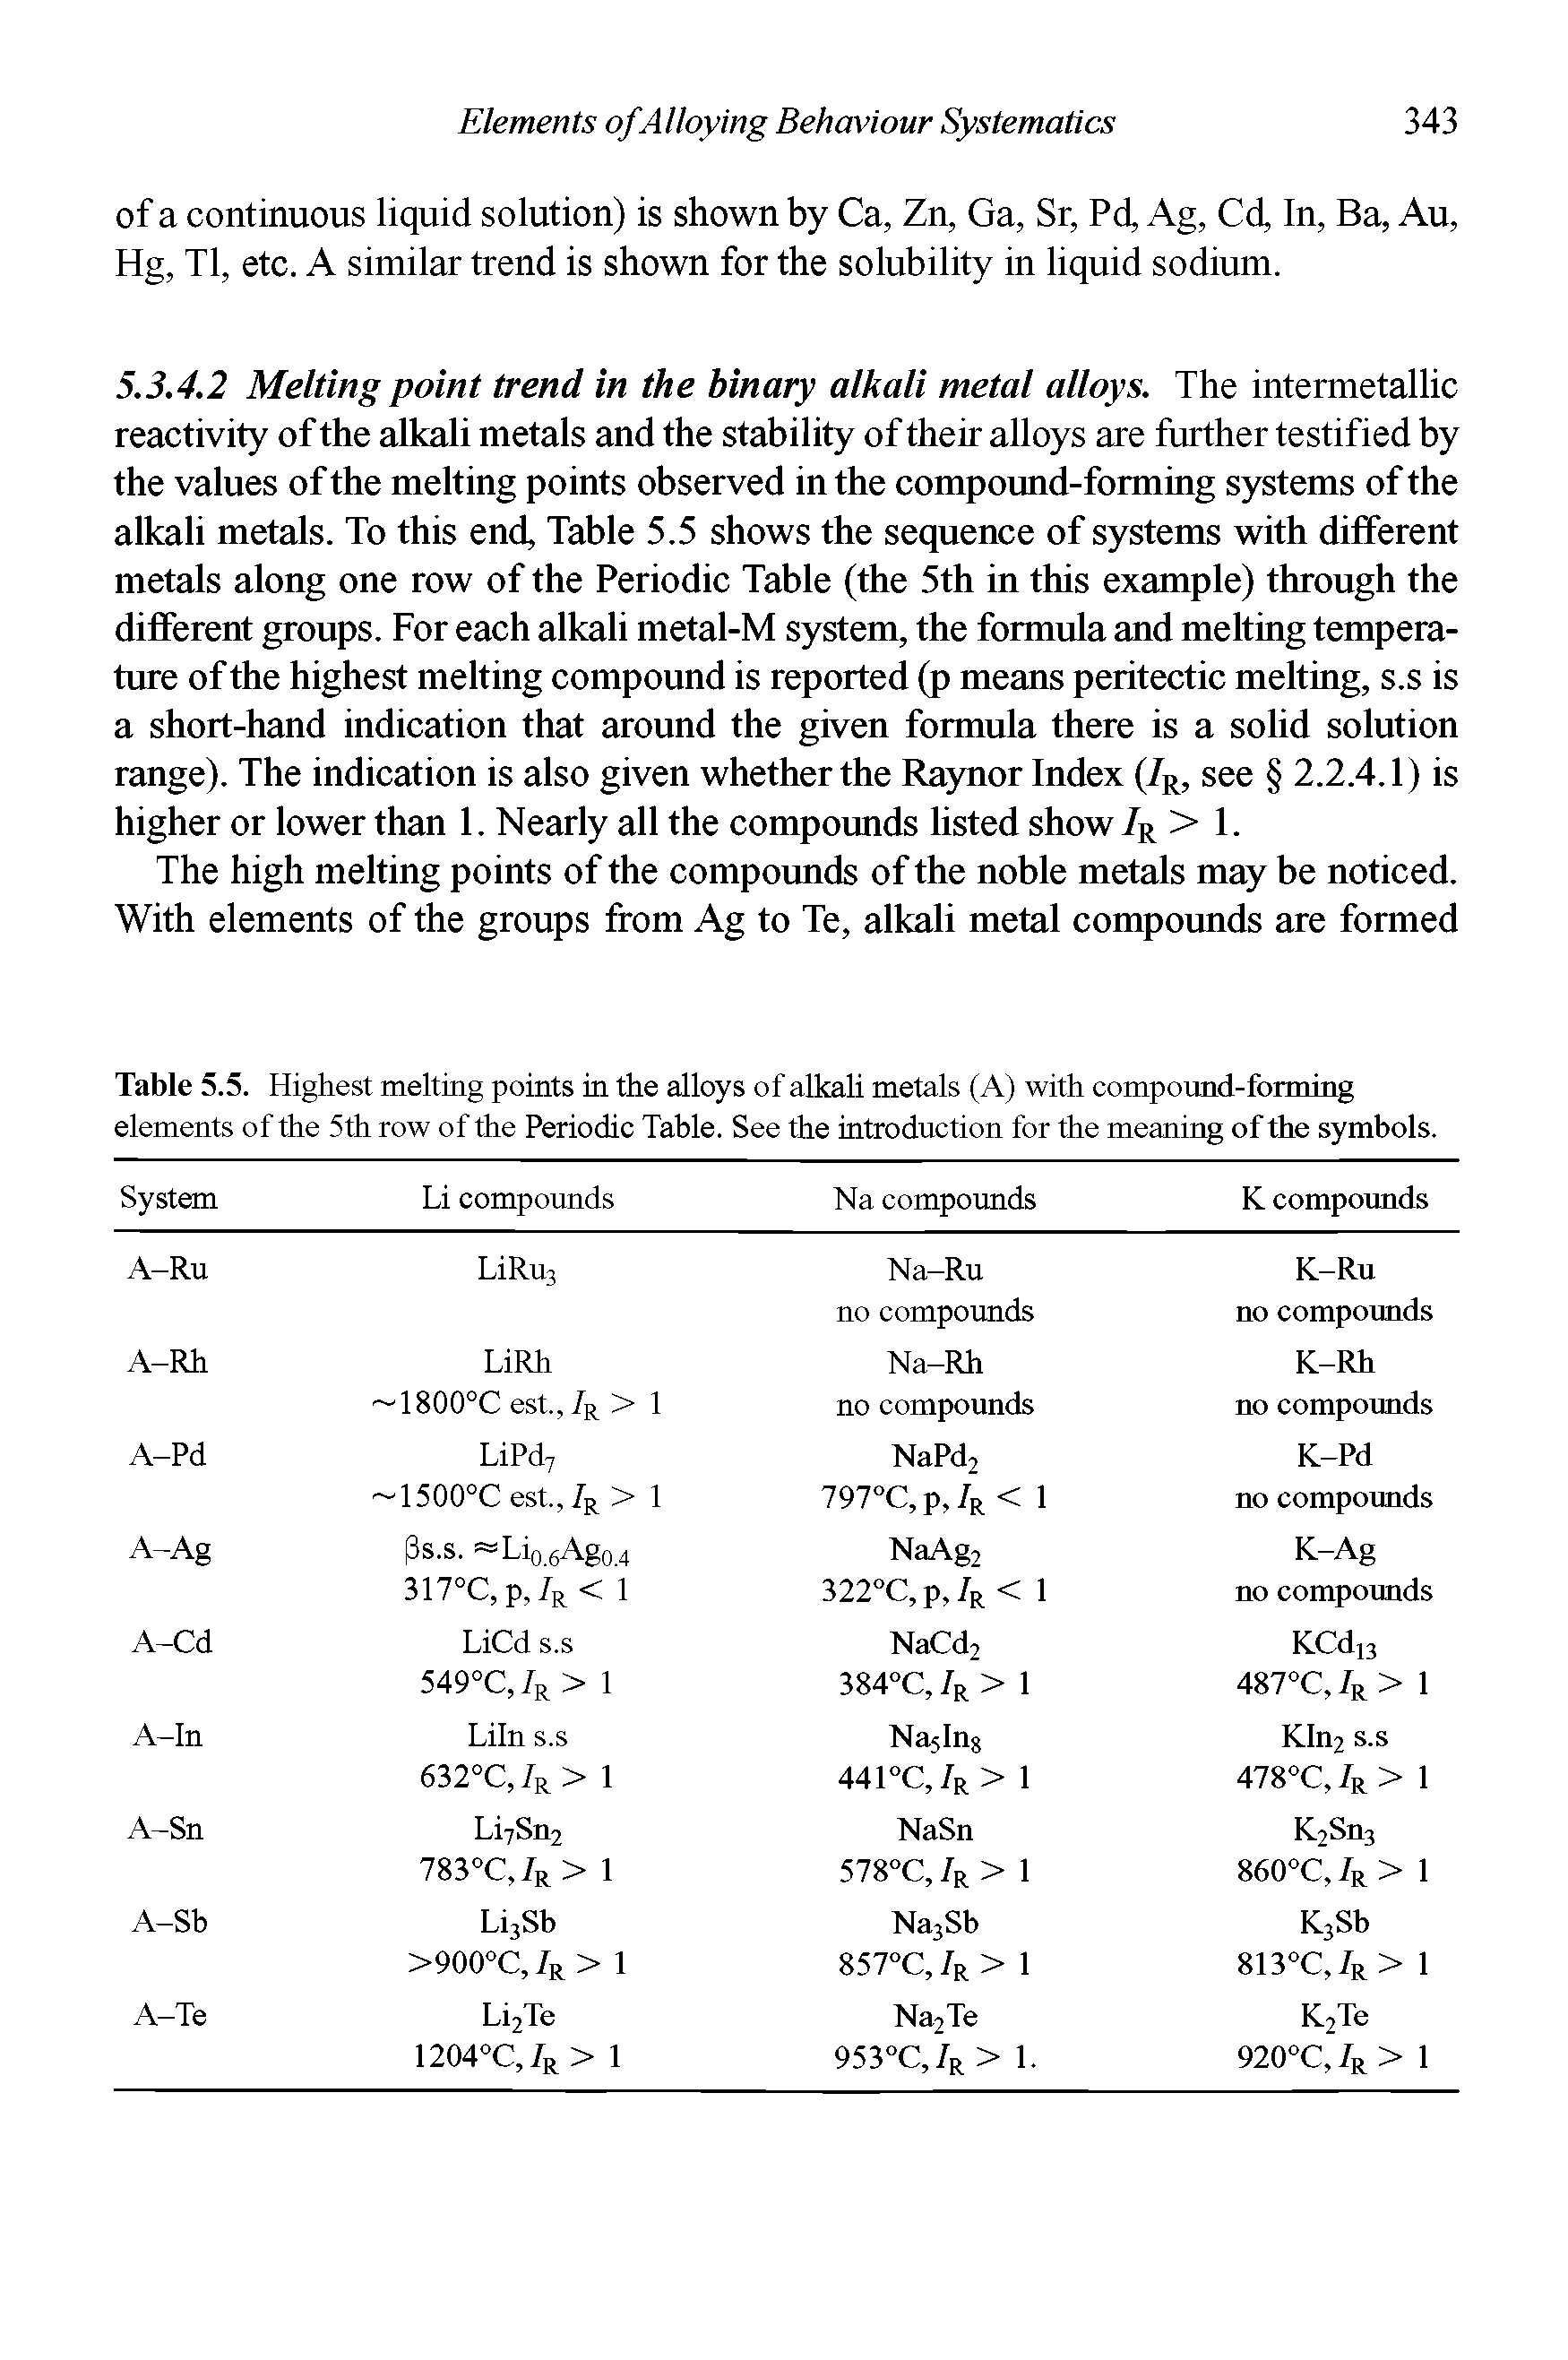 Table 5.5. Highest melting points in the alloys of alkali metals (A) with compound-forming elements of the 5th row of the Periodic Table. See the introduction for the meaning of the symbols.